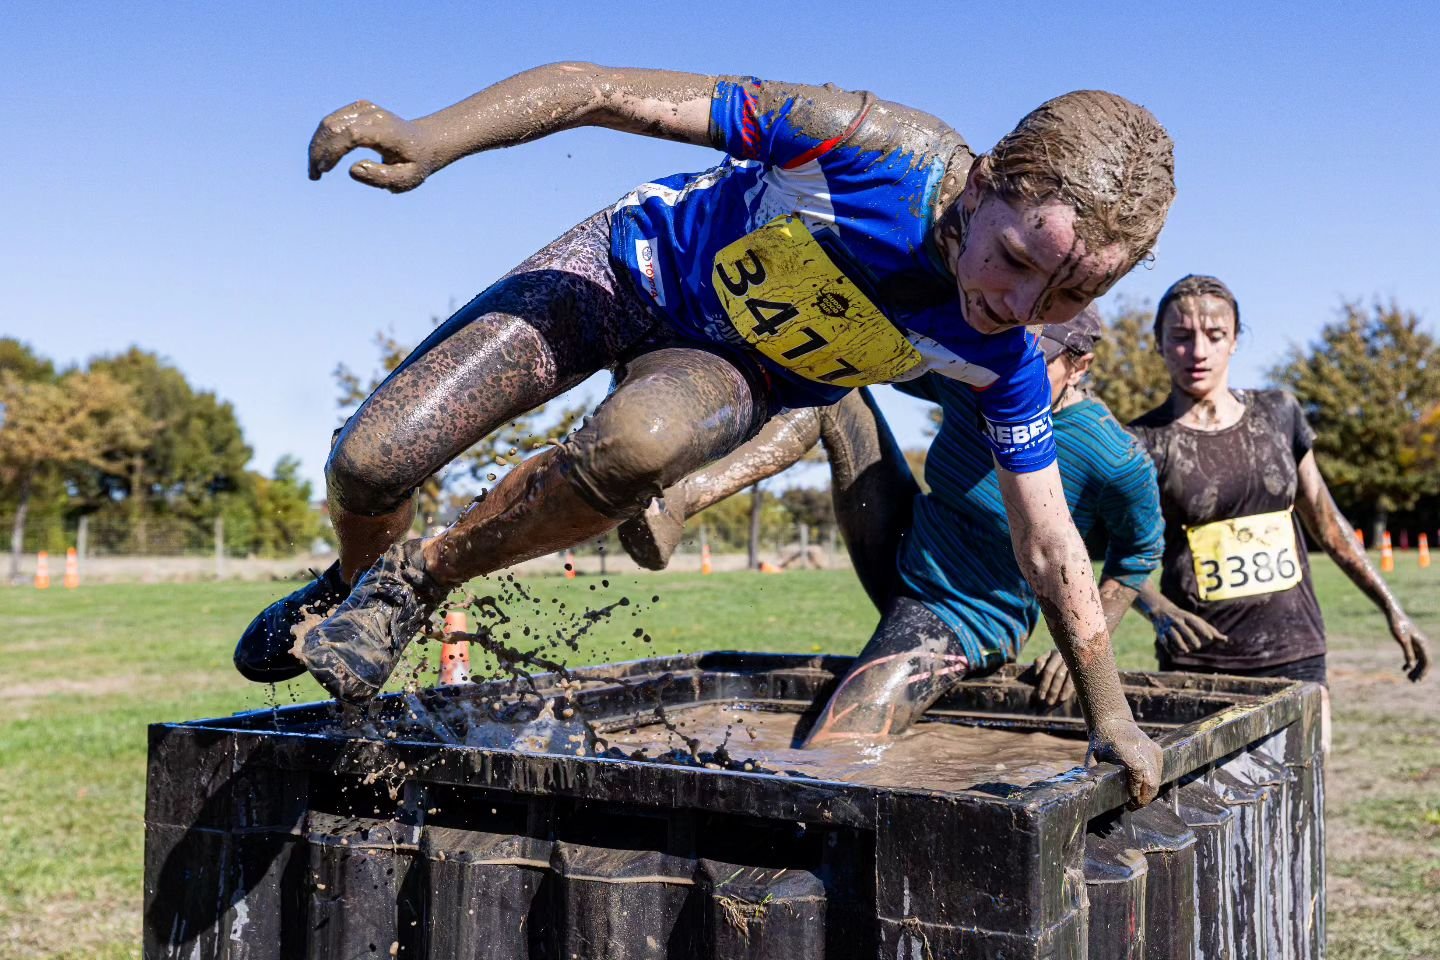 Photo highlights from last week's Muddy Good Run at Christchurch's Canterbury Agriculture Park.

For more content checkout my website link below for more information on my services and packages for events like this.👇 
www.naturallightphotographycomp